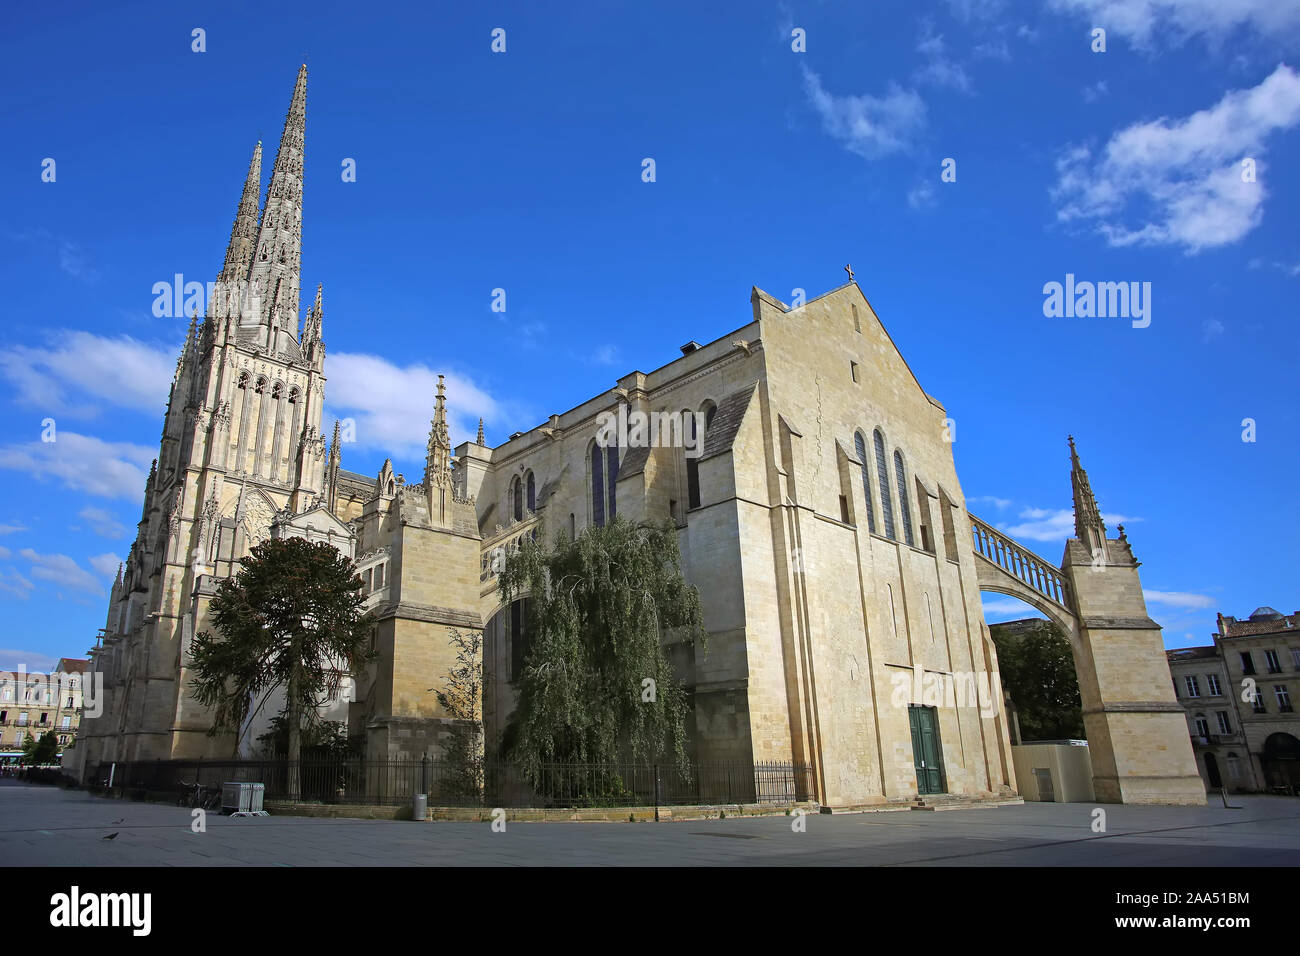 Beautiful St. Andre Cathedral from the 12th and the 14th century & is a UNESCO world heritage site, in the centre of the city, Bordeaux, France. Stock Photo